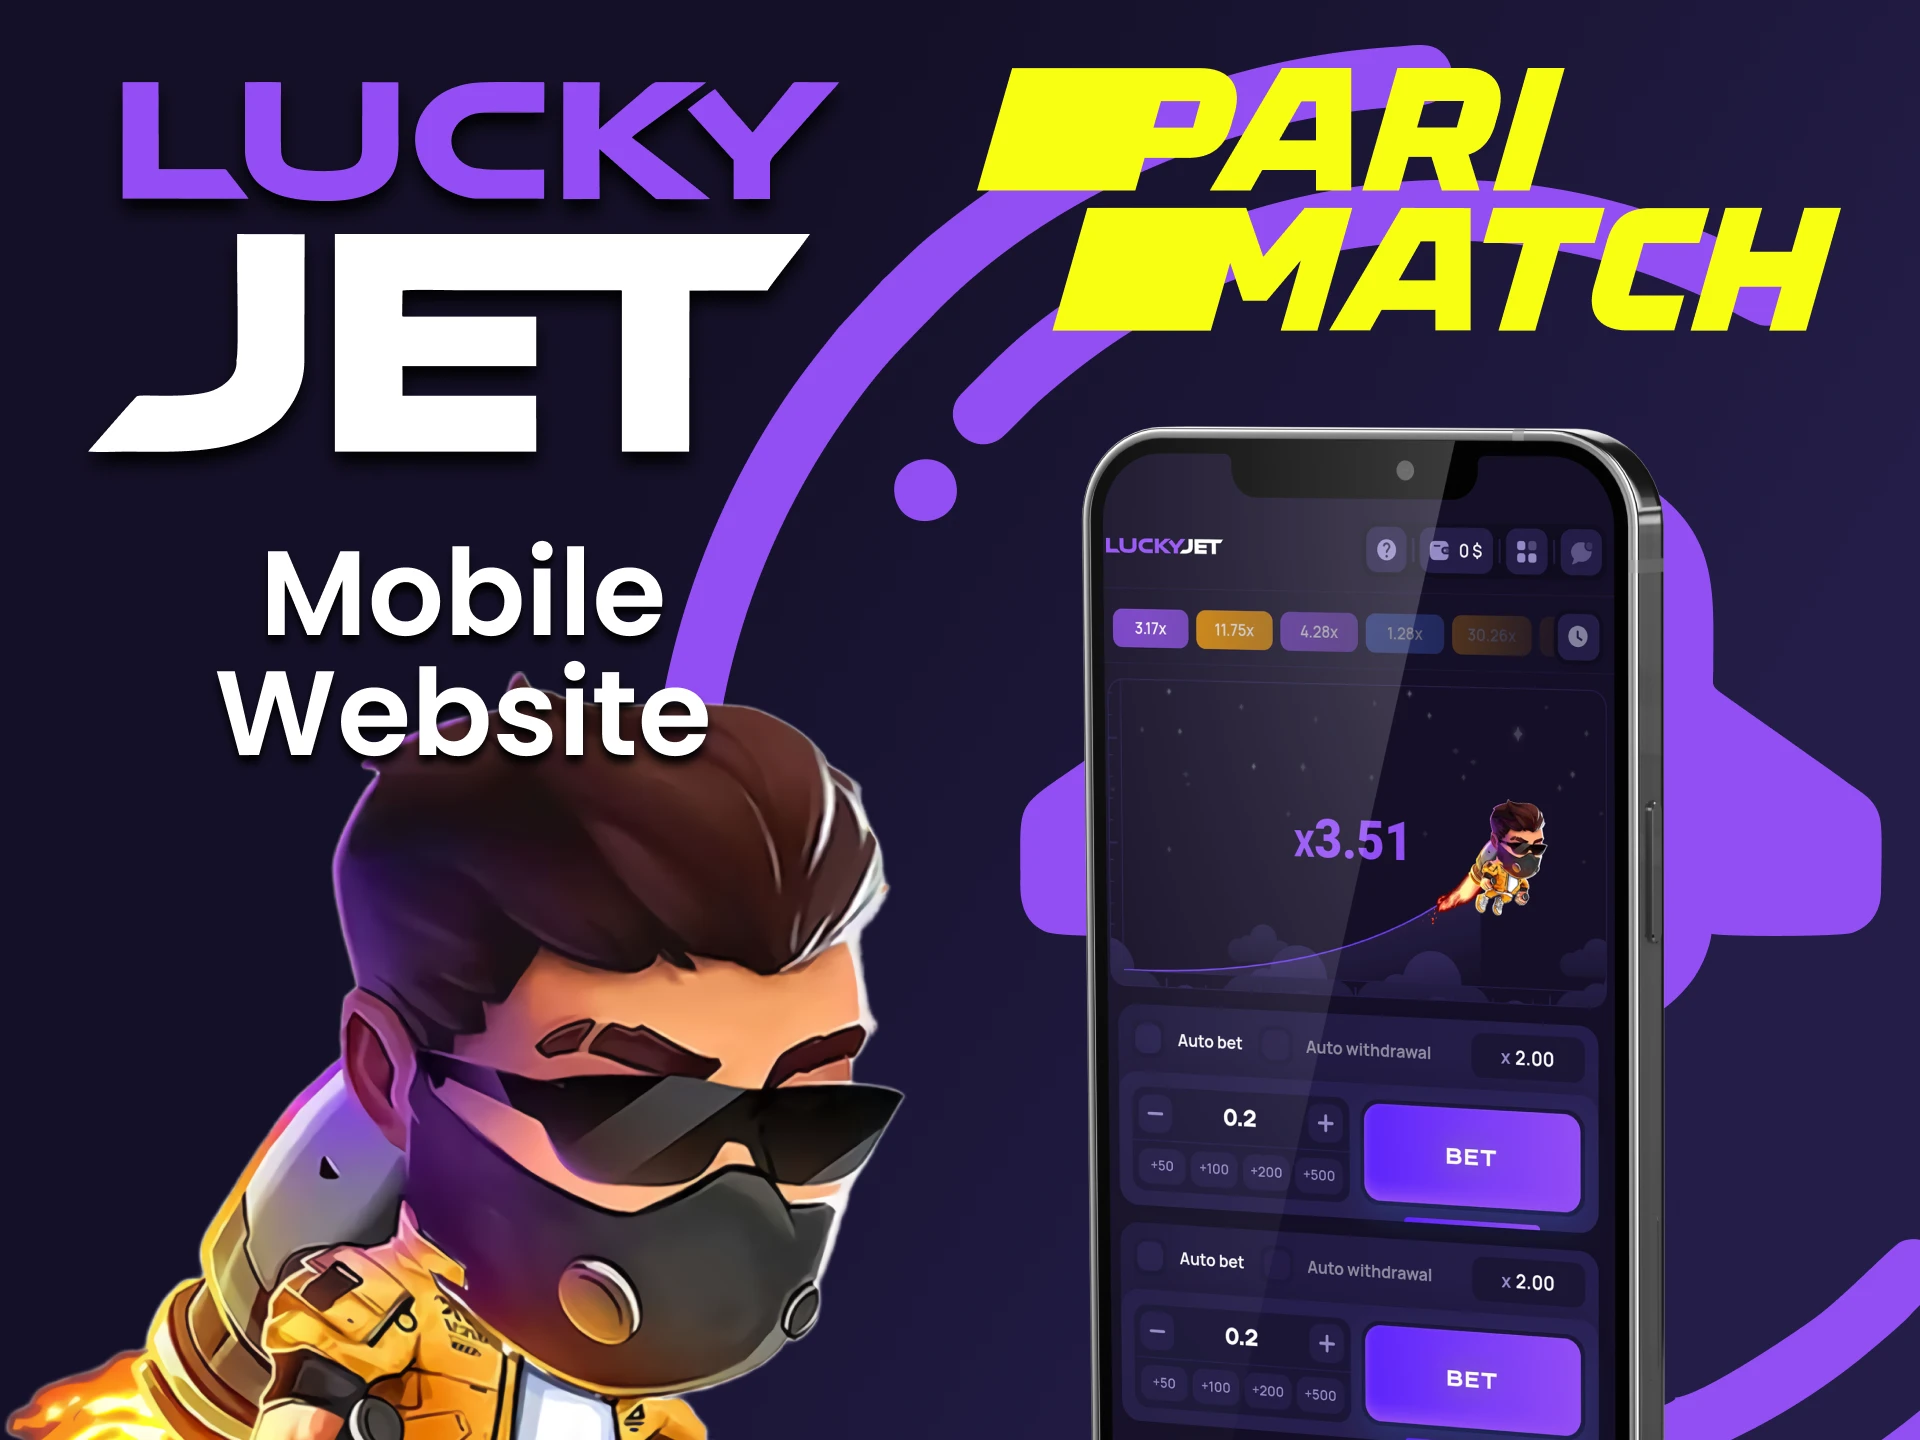 Use your smartphone to play Lucky Jet at Parimatch.